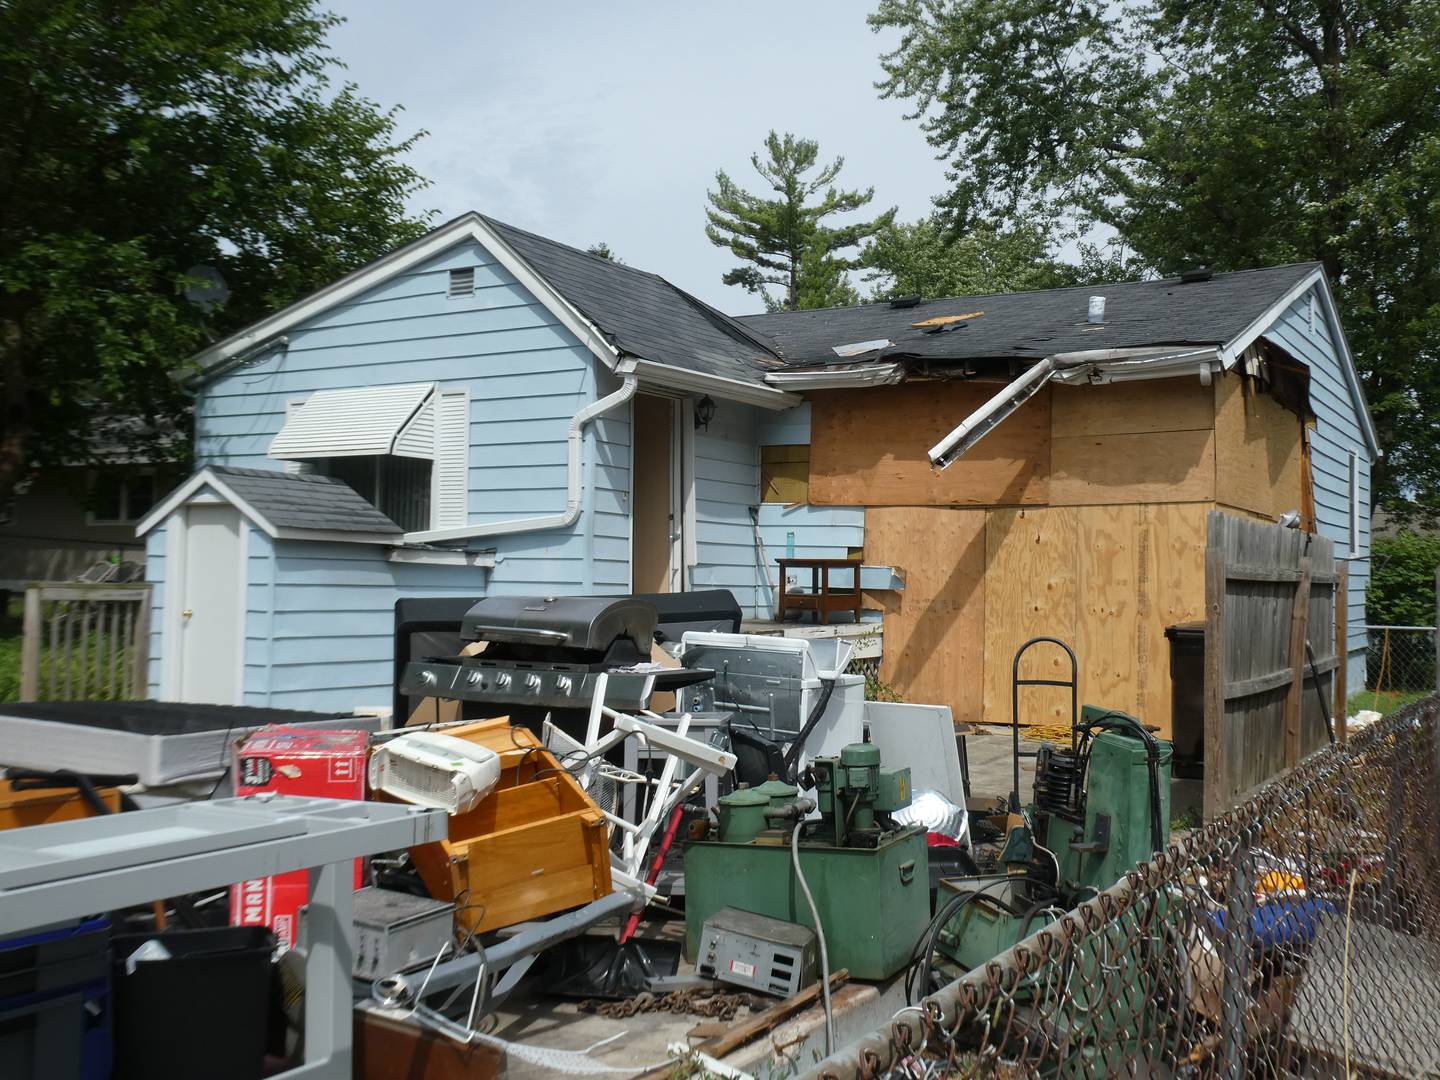 One week later, on August 3, 2022, the home in Crystal Lake where a car crashed through a garage has been boarded up and damaged furniture has been piled in the yard. But the homeowner injured in the accident, 64-year-old Angelo Pleotis, could be paralyzed for life, his family says.